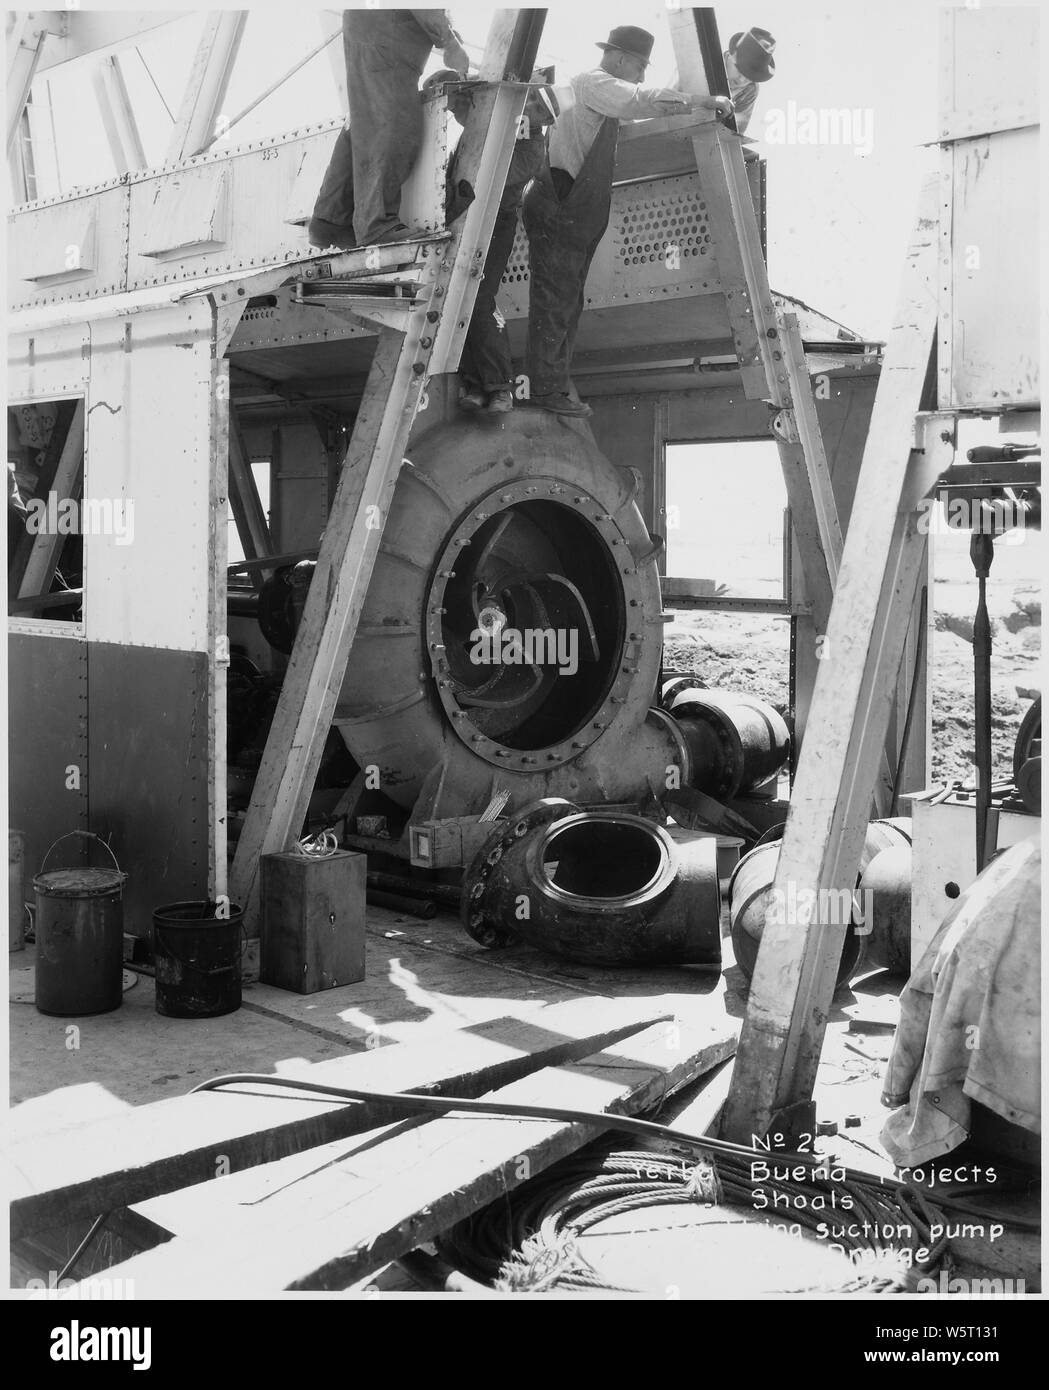 No. 291 Yerba Buena Shoals Projects Assemblying Suction Pump for Protable Dredge Stock Photo